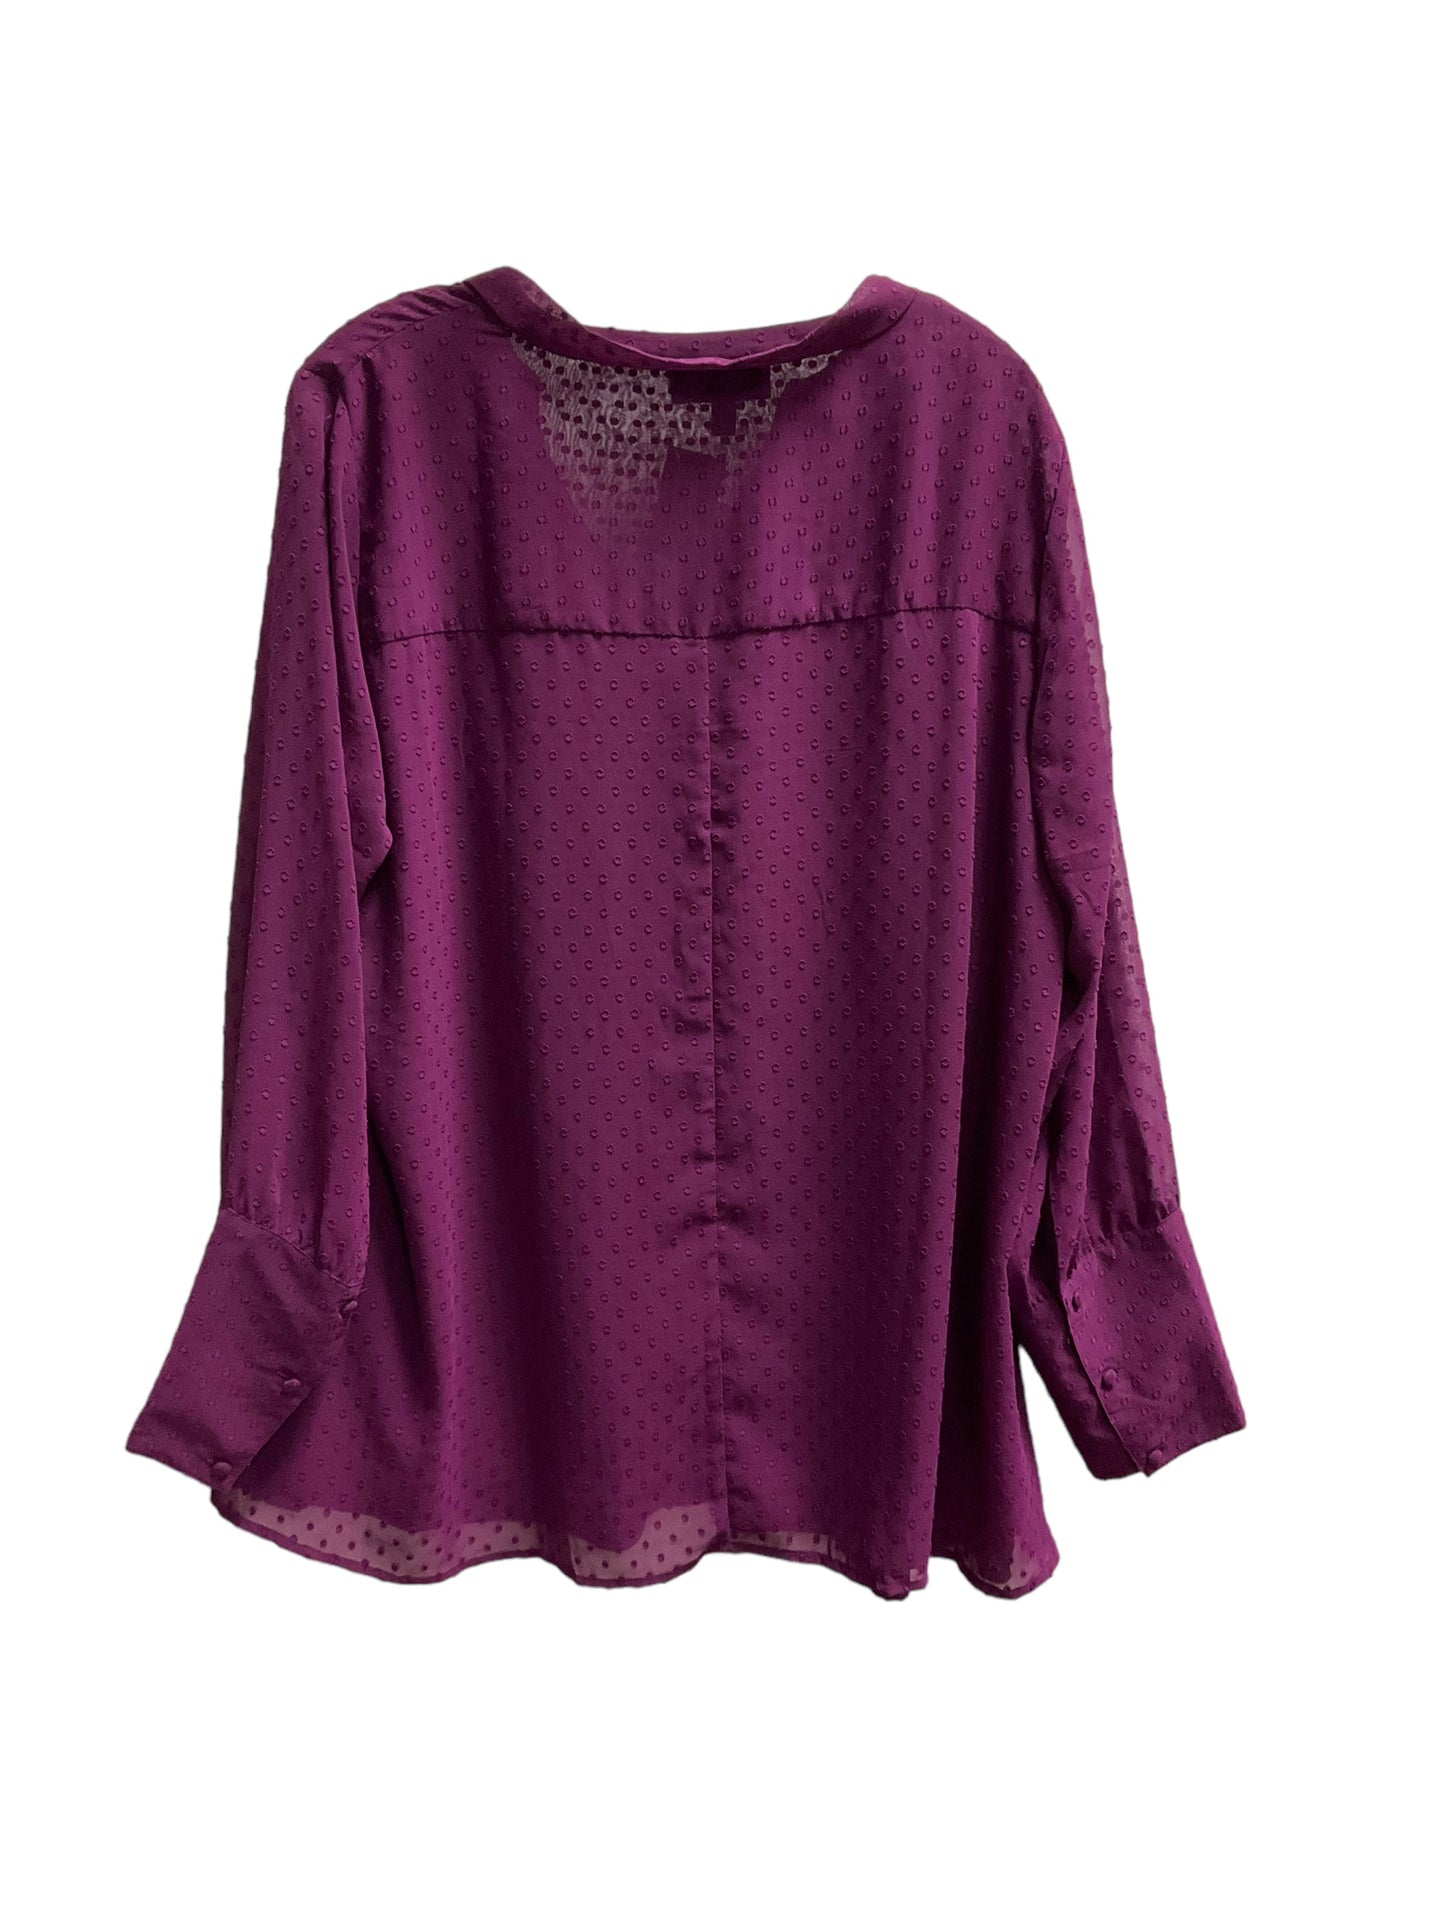 Top Long Sleeve By Lane Bryant  Size: 18